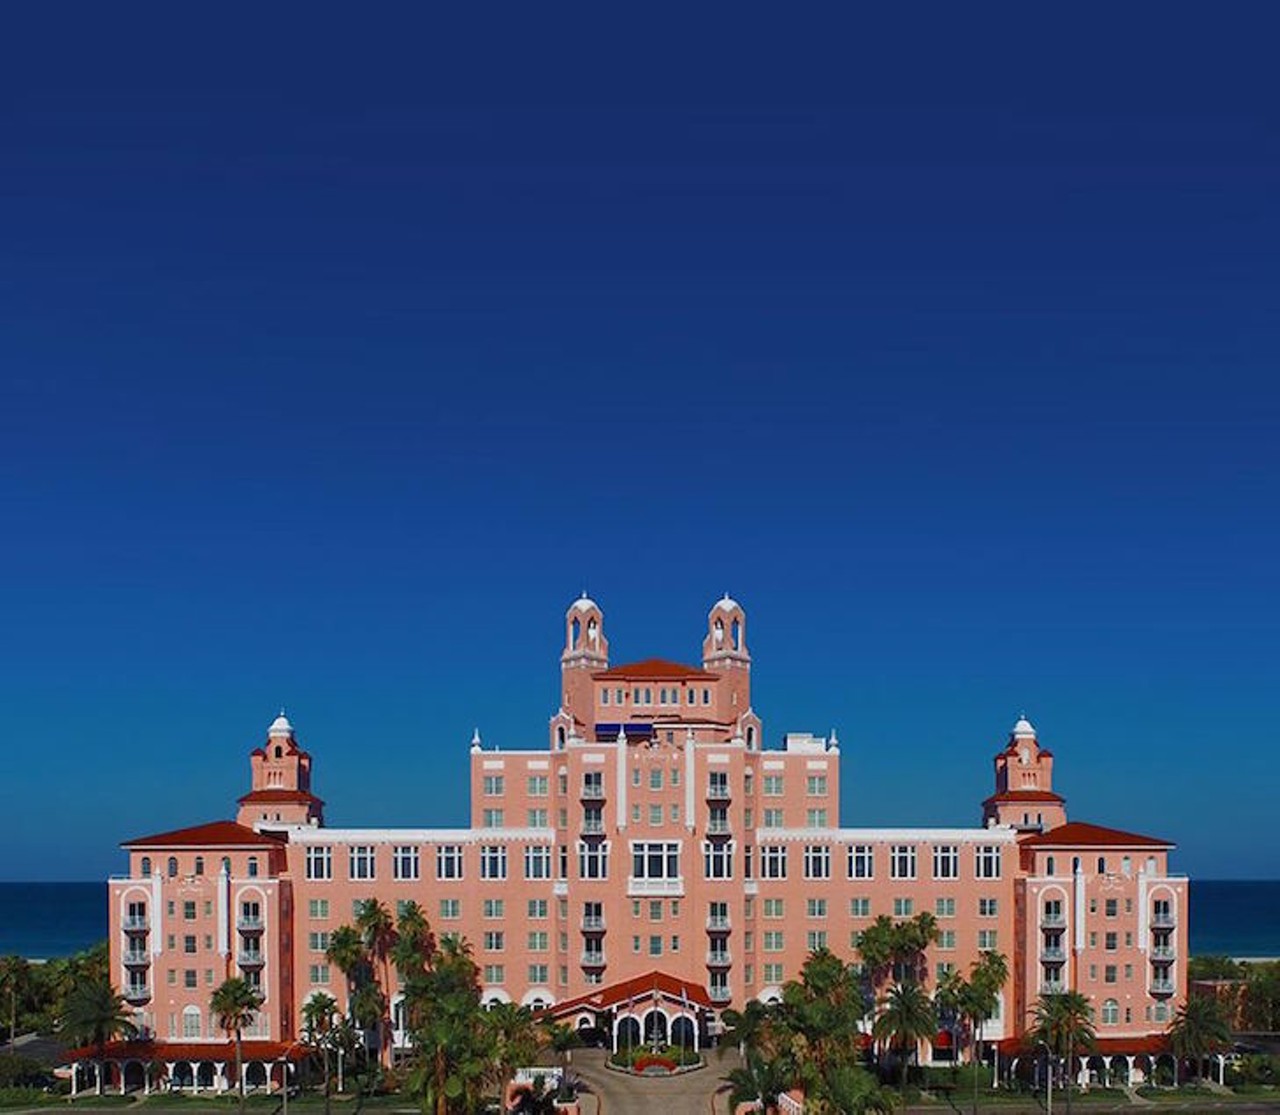 Slip into a plush robe and slippers with a day pass to The Don CeSar Spa
The Don CeSar, 3400 Gulf Blvd, St Pete Beach, 727-360-1881 doncesar.com 
The Don CeSar, the unmistakable pink palace of St. Pete Beach, features a number of indulgent treatments and amenities in their Spa Oceana. Treat yourself to a day pass for access to spa locker areas, whirlpools, steam rooms, whisper lounge, and rooftop terrace overlooking the Gulf of Mexico, or parooze the spa&#146;s full list of services for additional fees.
Photo via doncesar.com